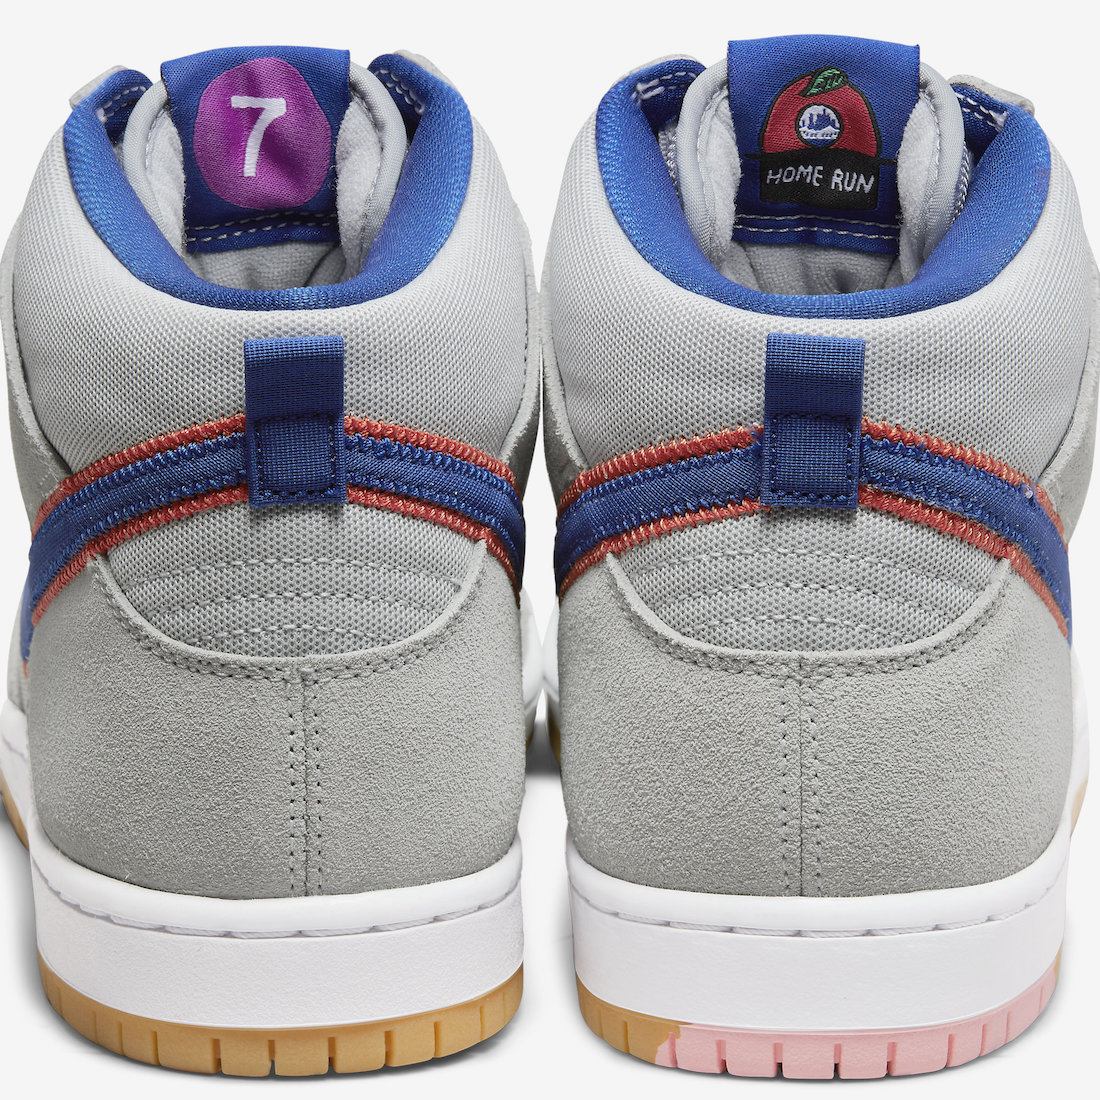 Nike-SB-Dunk-High-New-York-Mets-DH7155-001-Release-Date-8